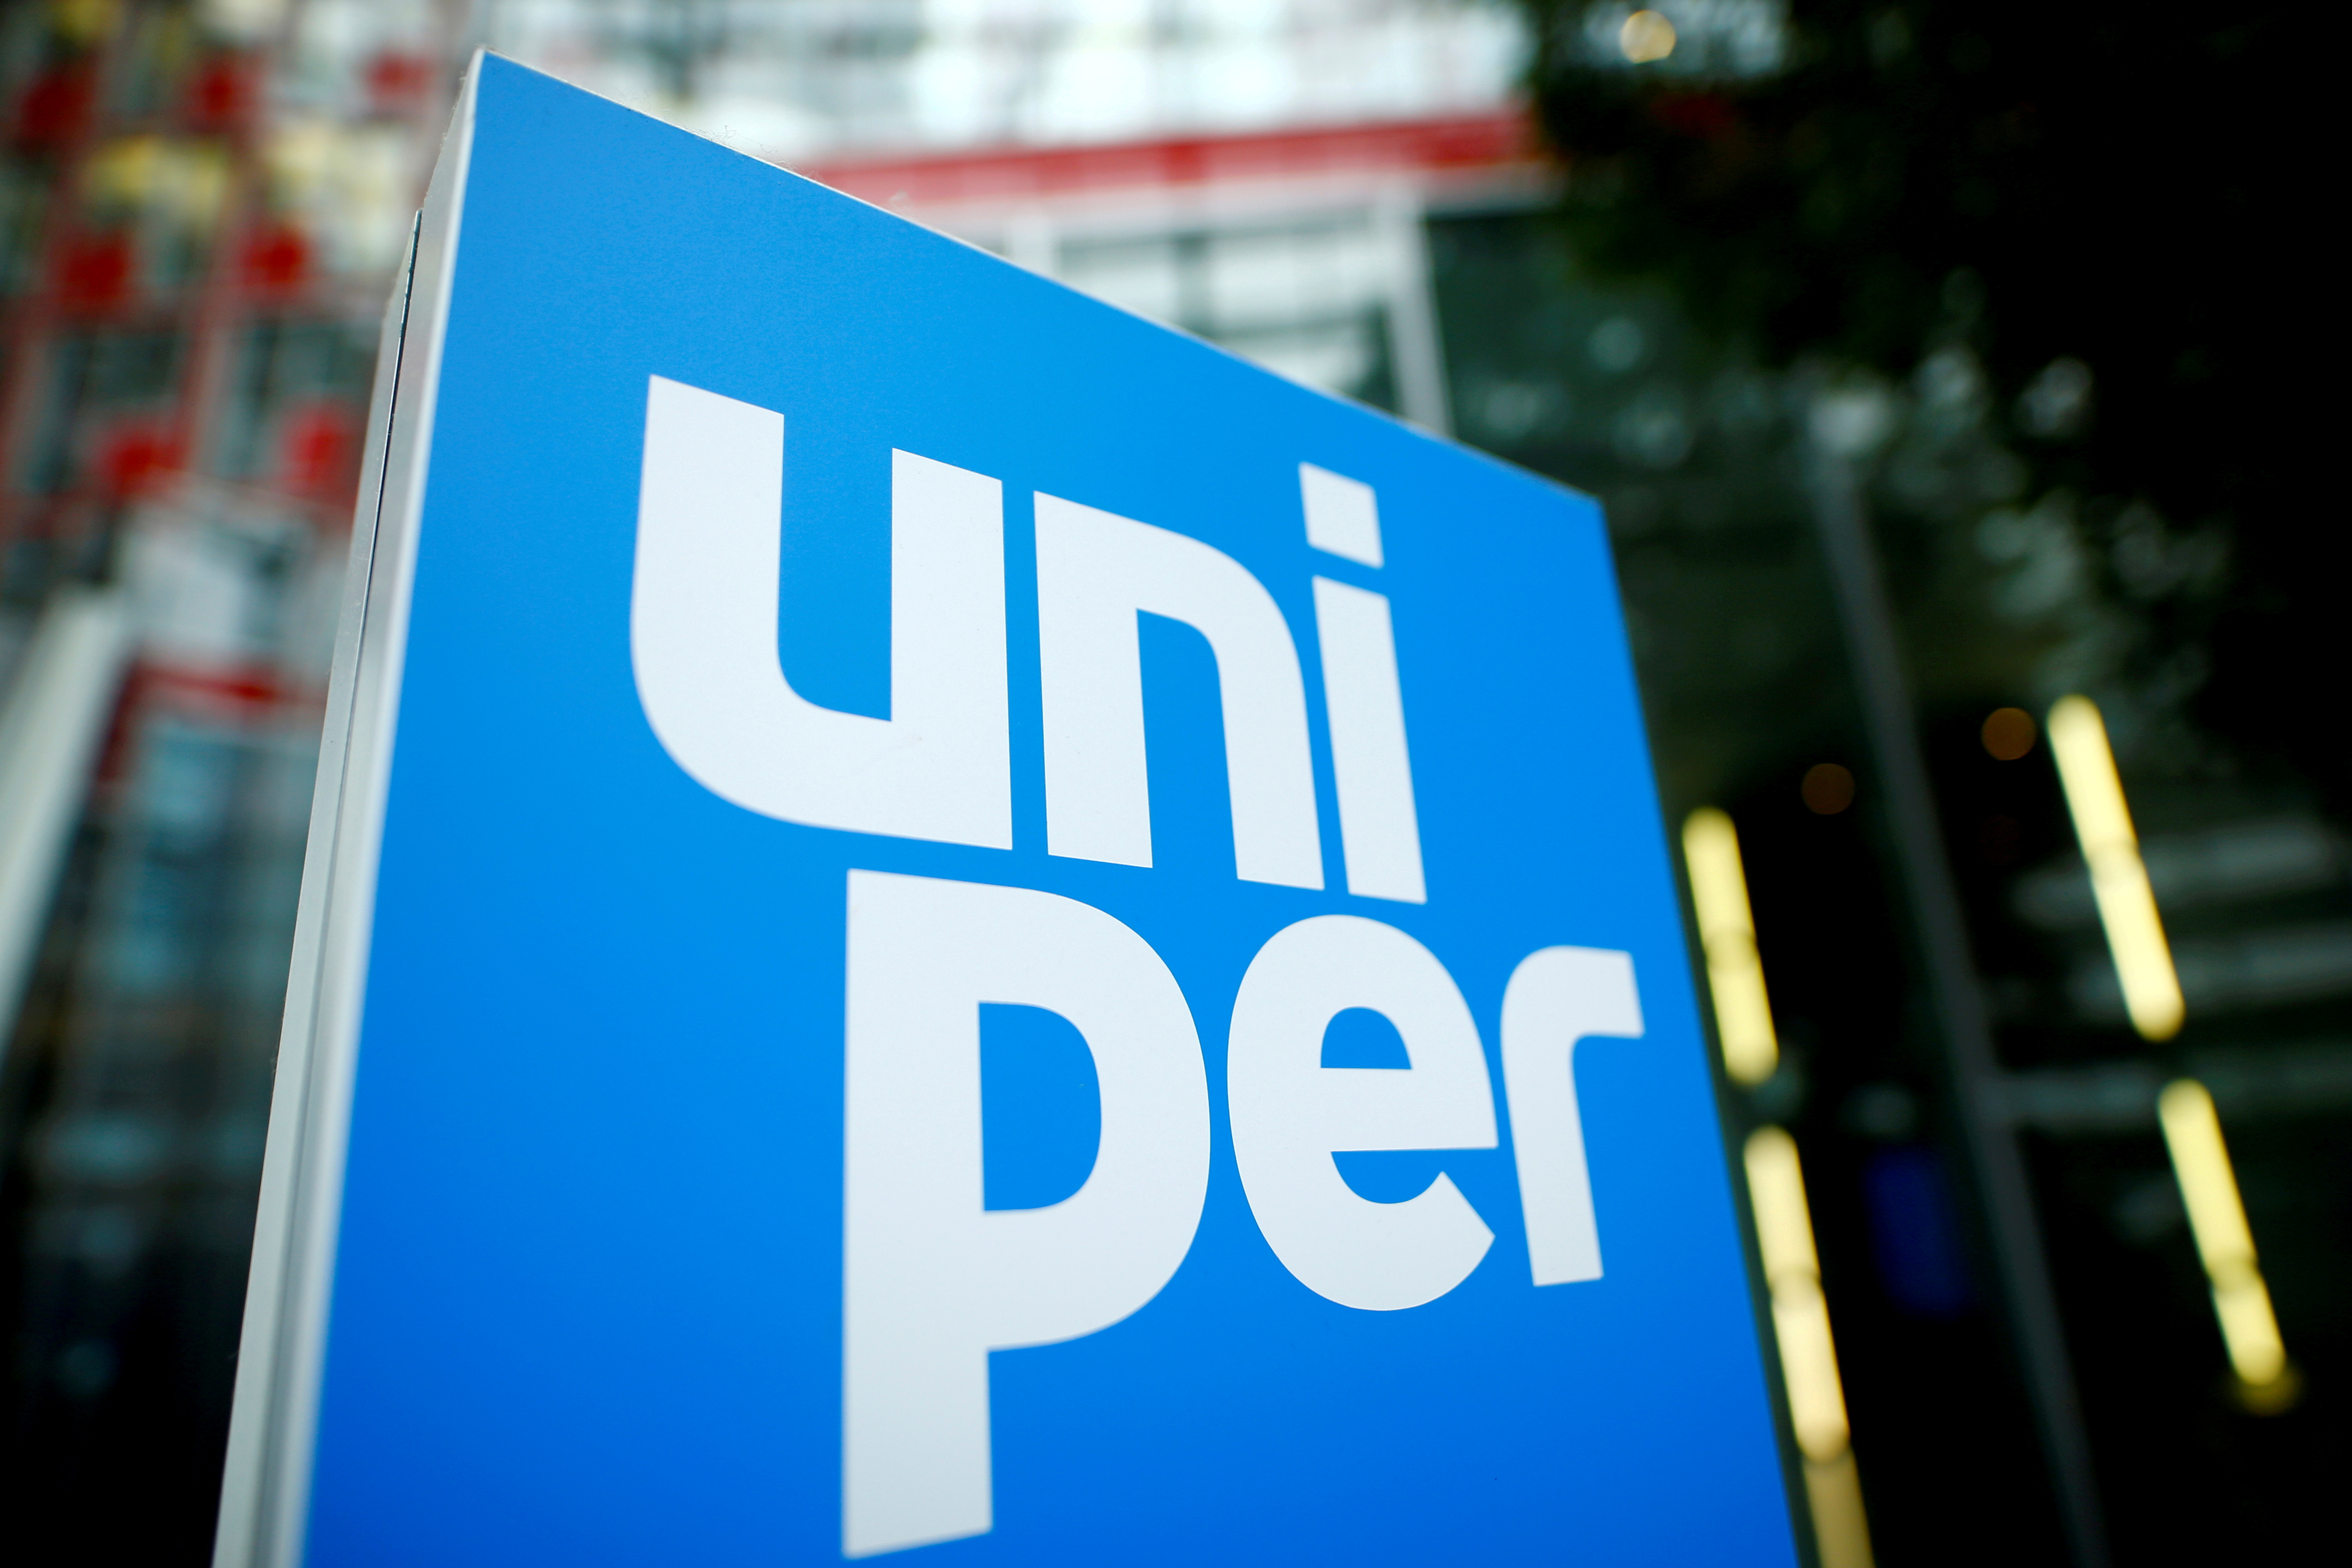 The logo of German energy utility company Uniper SE pictured at  the company's headquarters in Duesseldorf, Germany, March 10, 2020. REUTERS/Thilo Schmuelgen